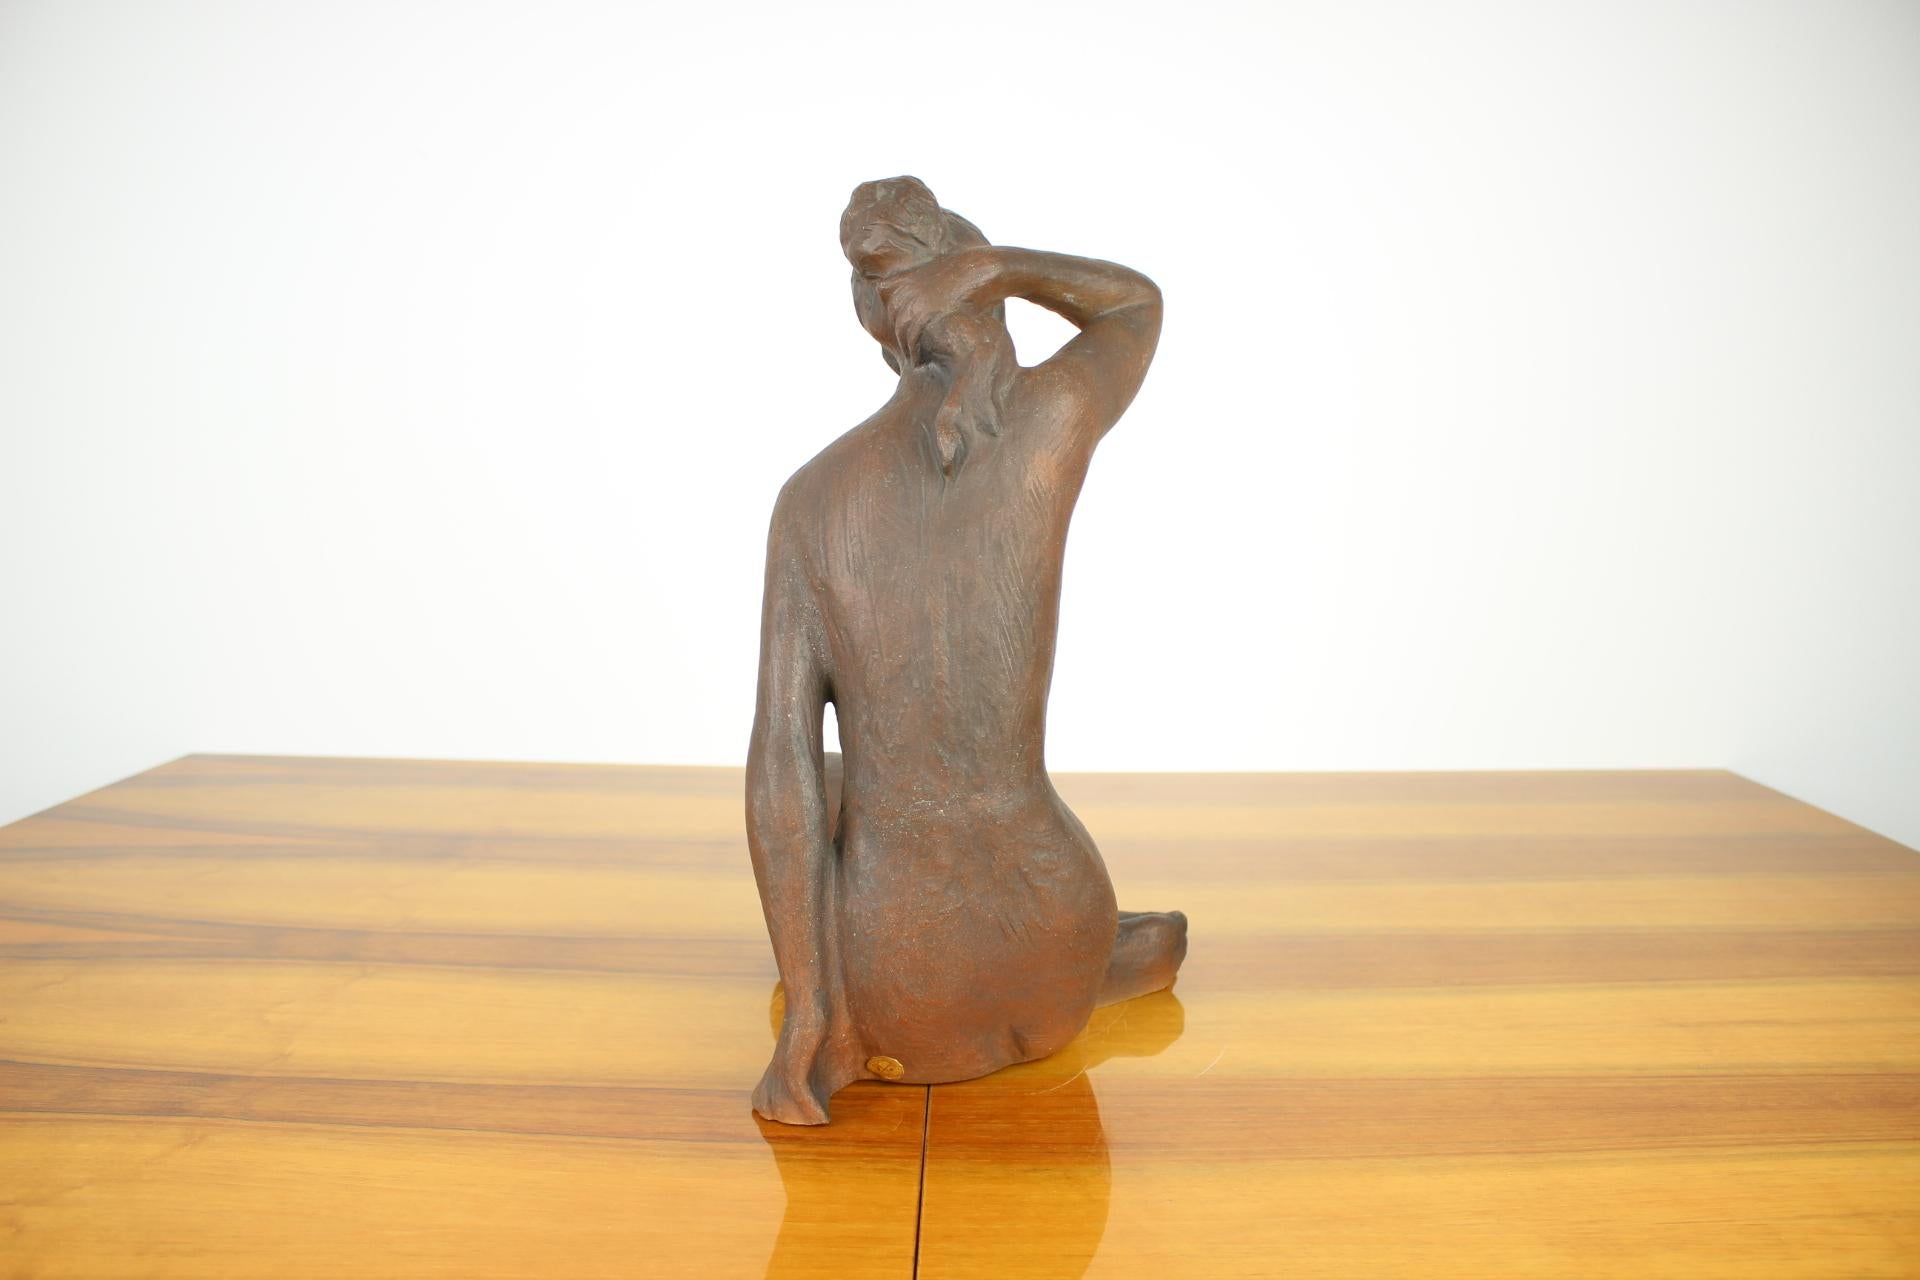 Mid-Century Modern Mid-Century Sculpture of Nude Sitting Women Designed by Jitka Forejtová, 1960s